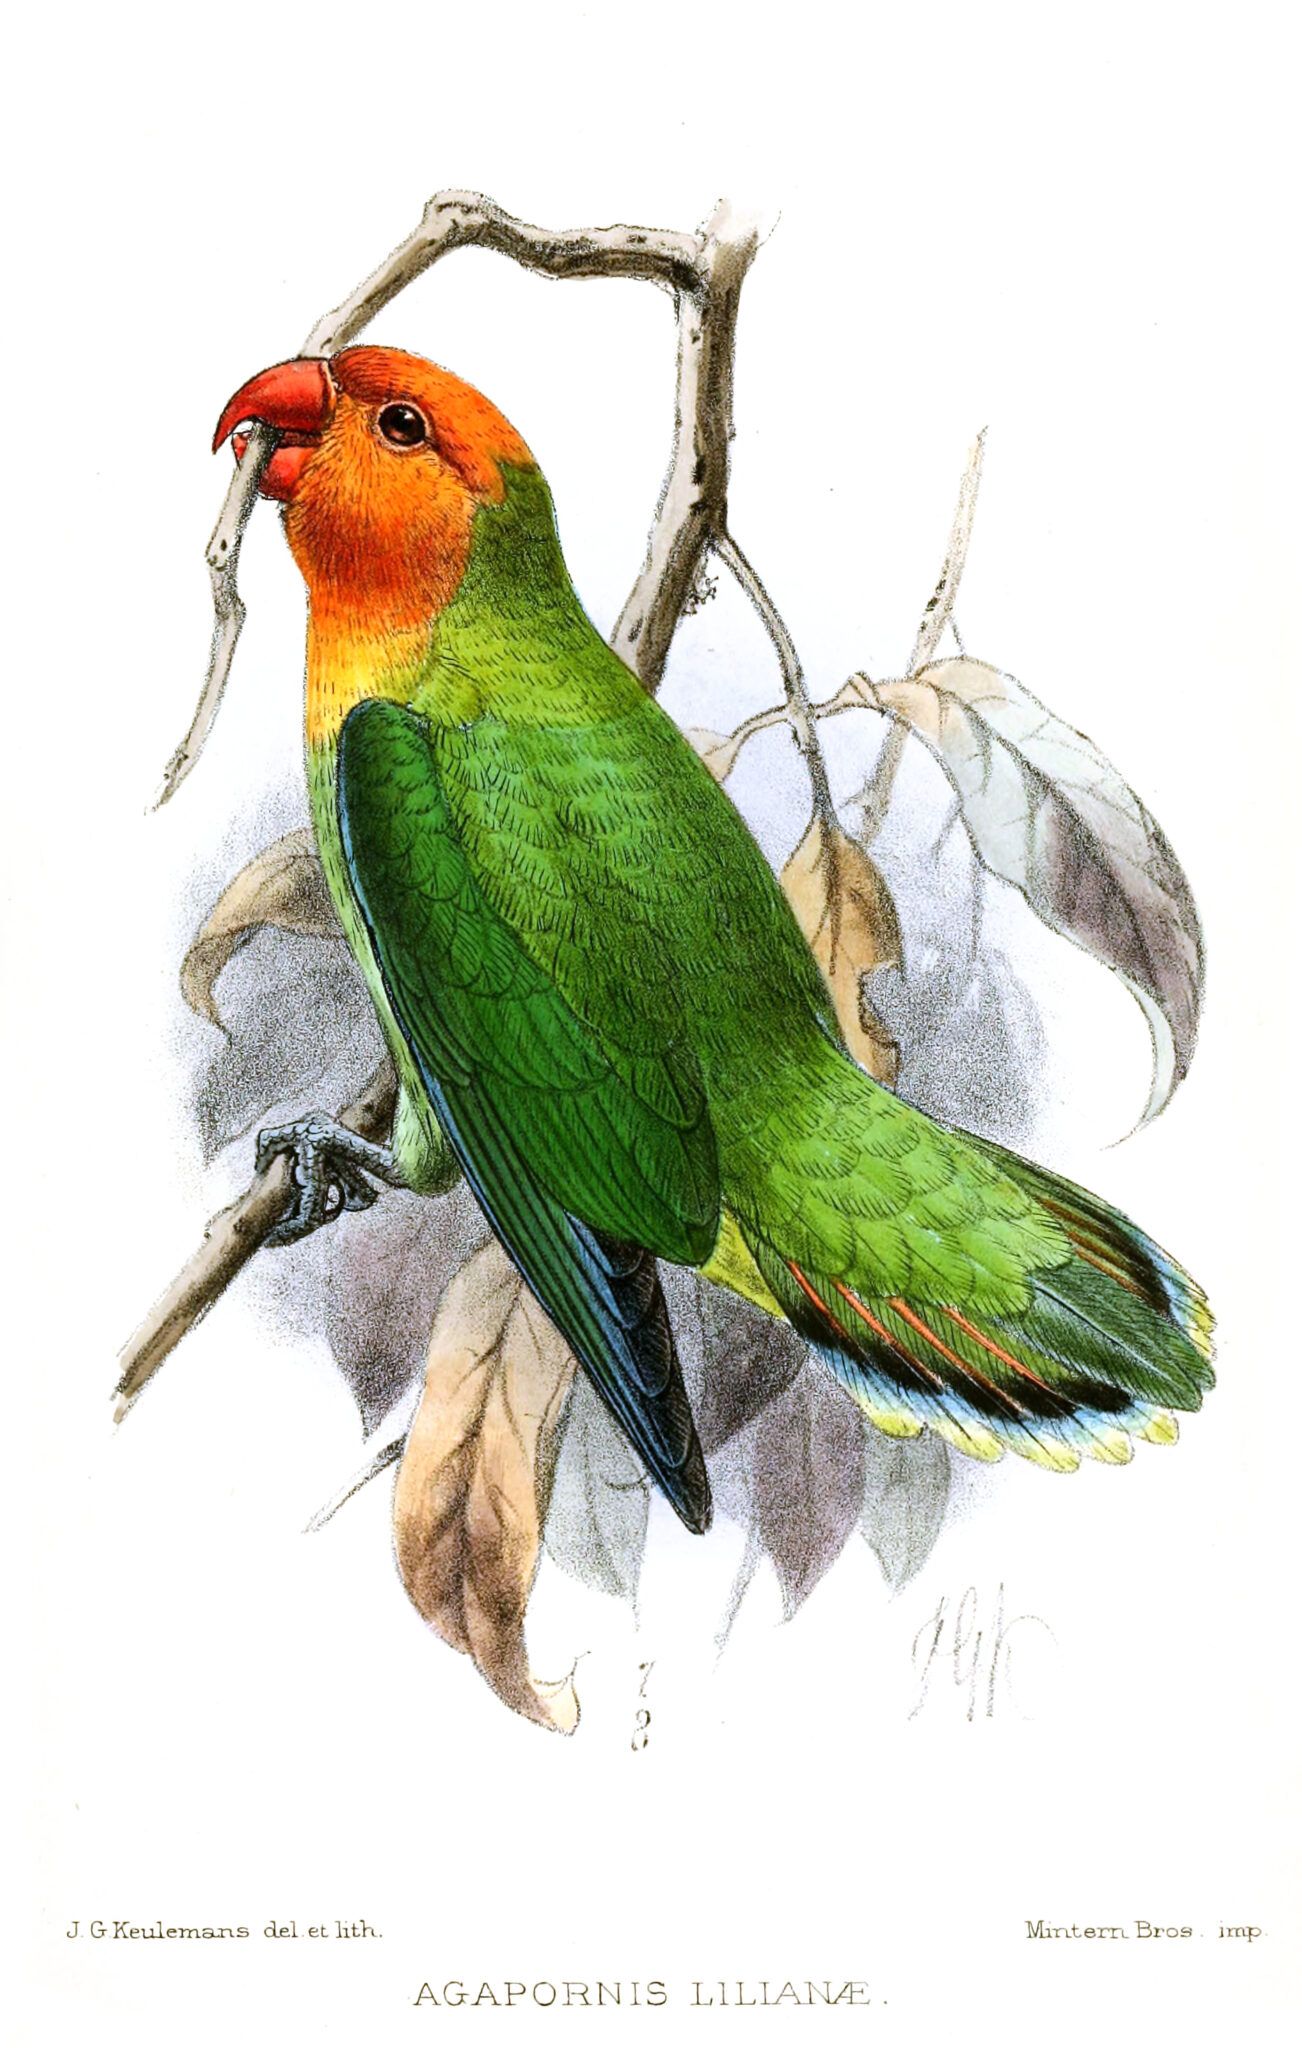 Vintage illustration of Agapornis lilianae, a small and colorful African parrot.